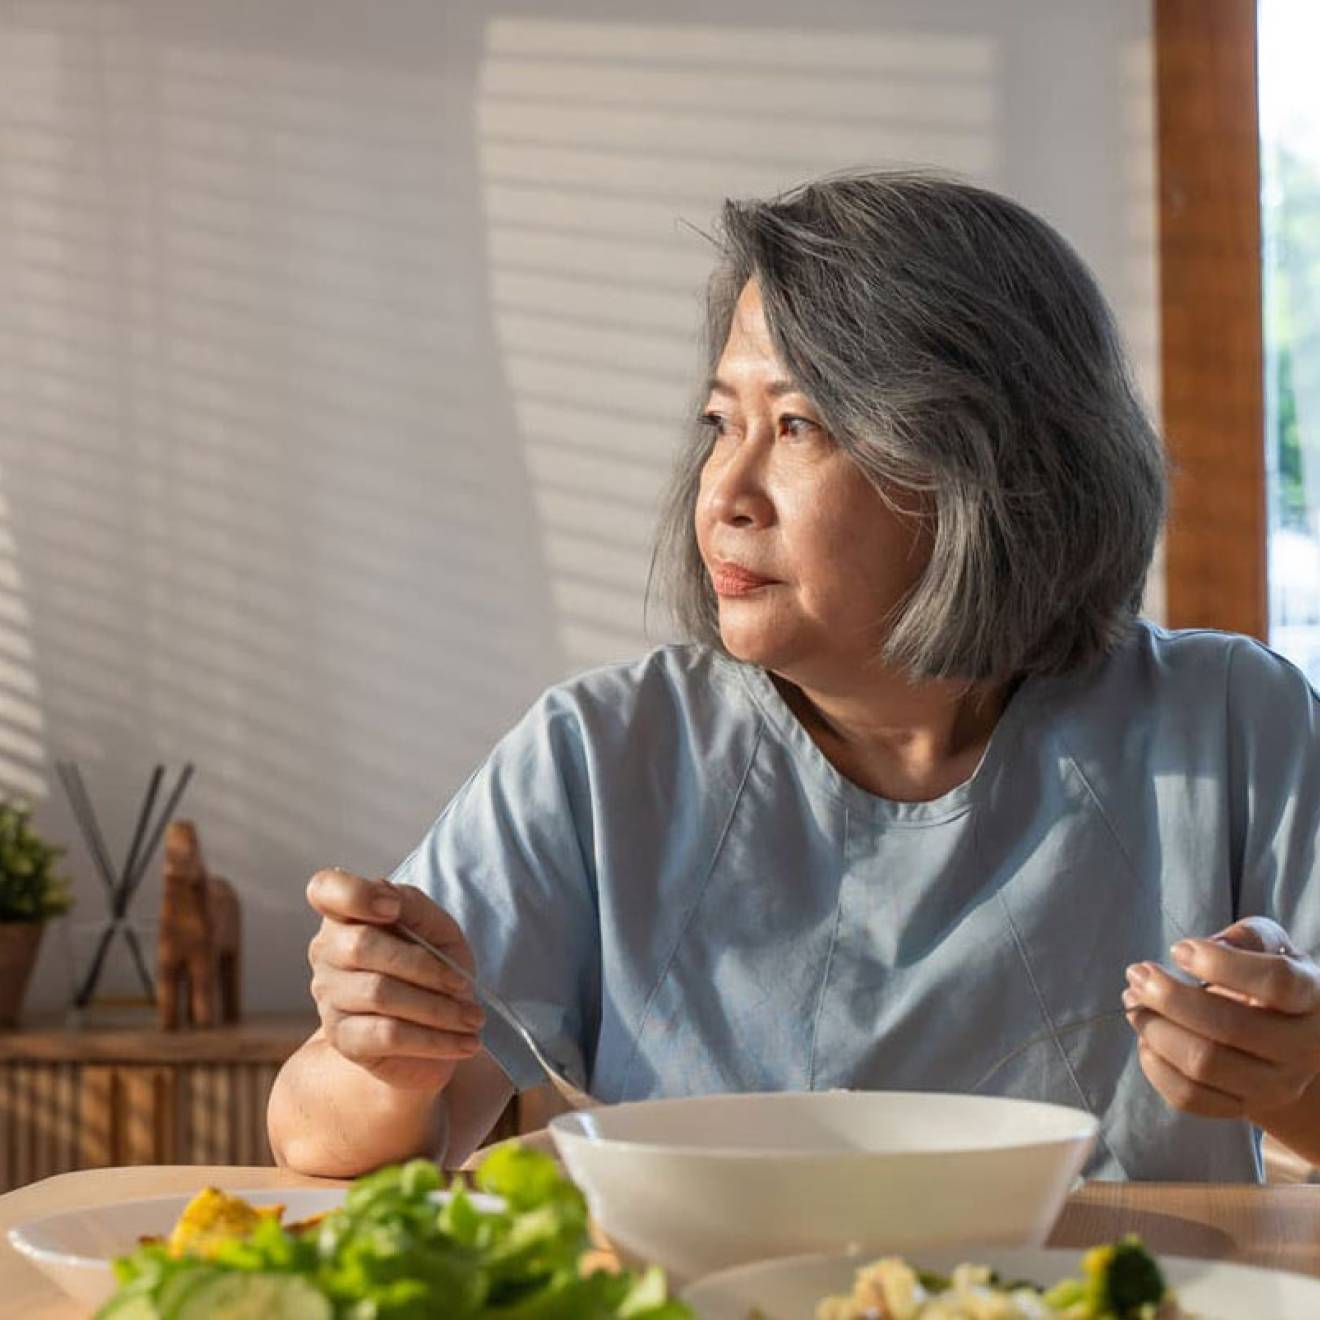 Older Asian woman eating alone, looking wistful